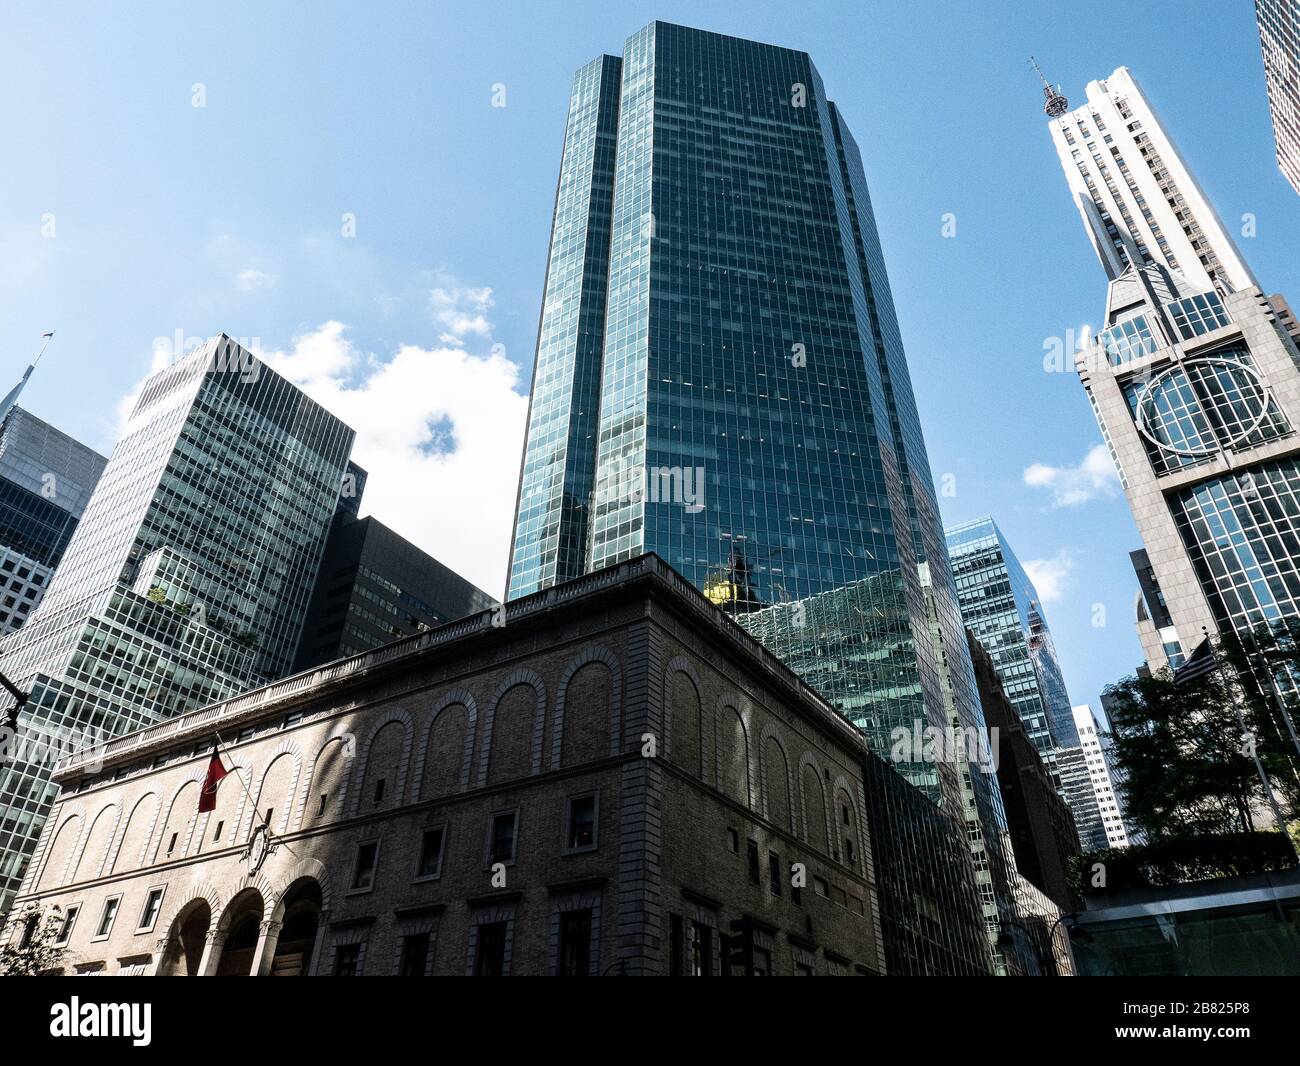 Skyscrapers and office buildings, low angle view, Manhattan, New York City Stock Photo